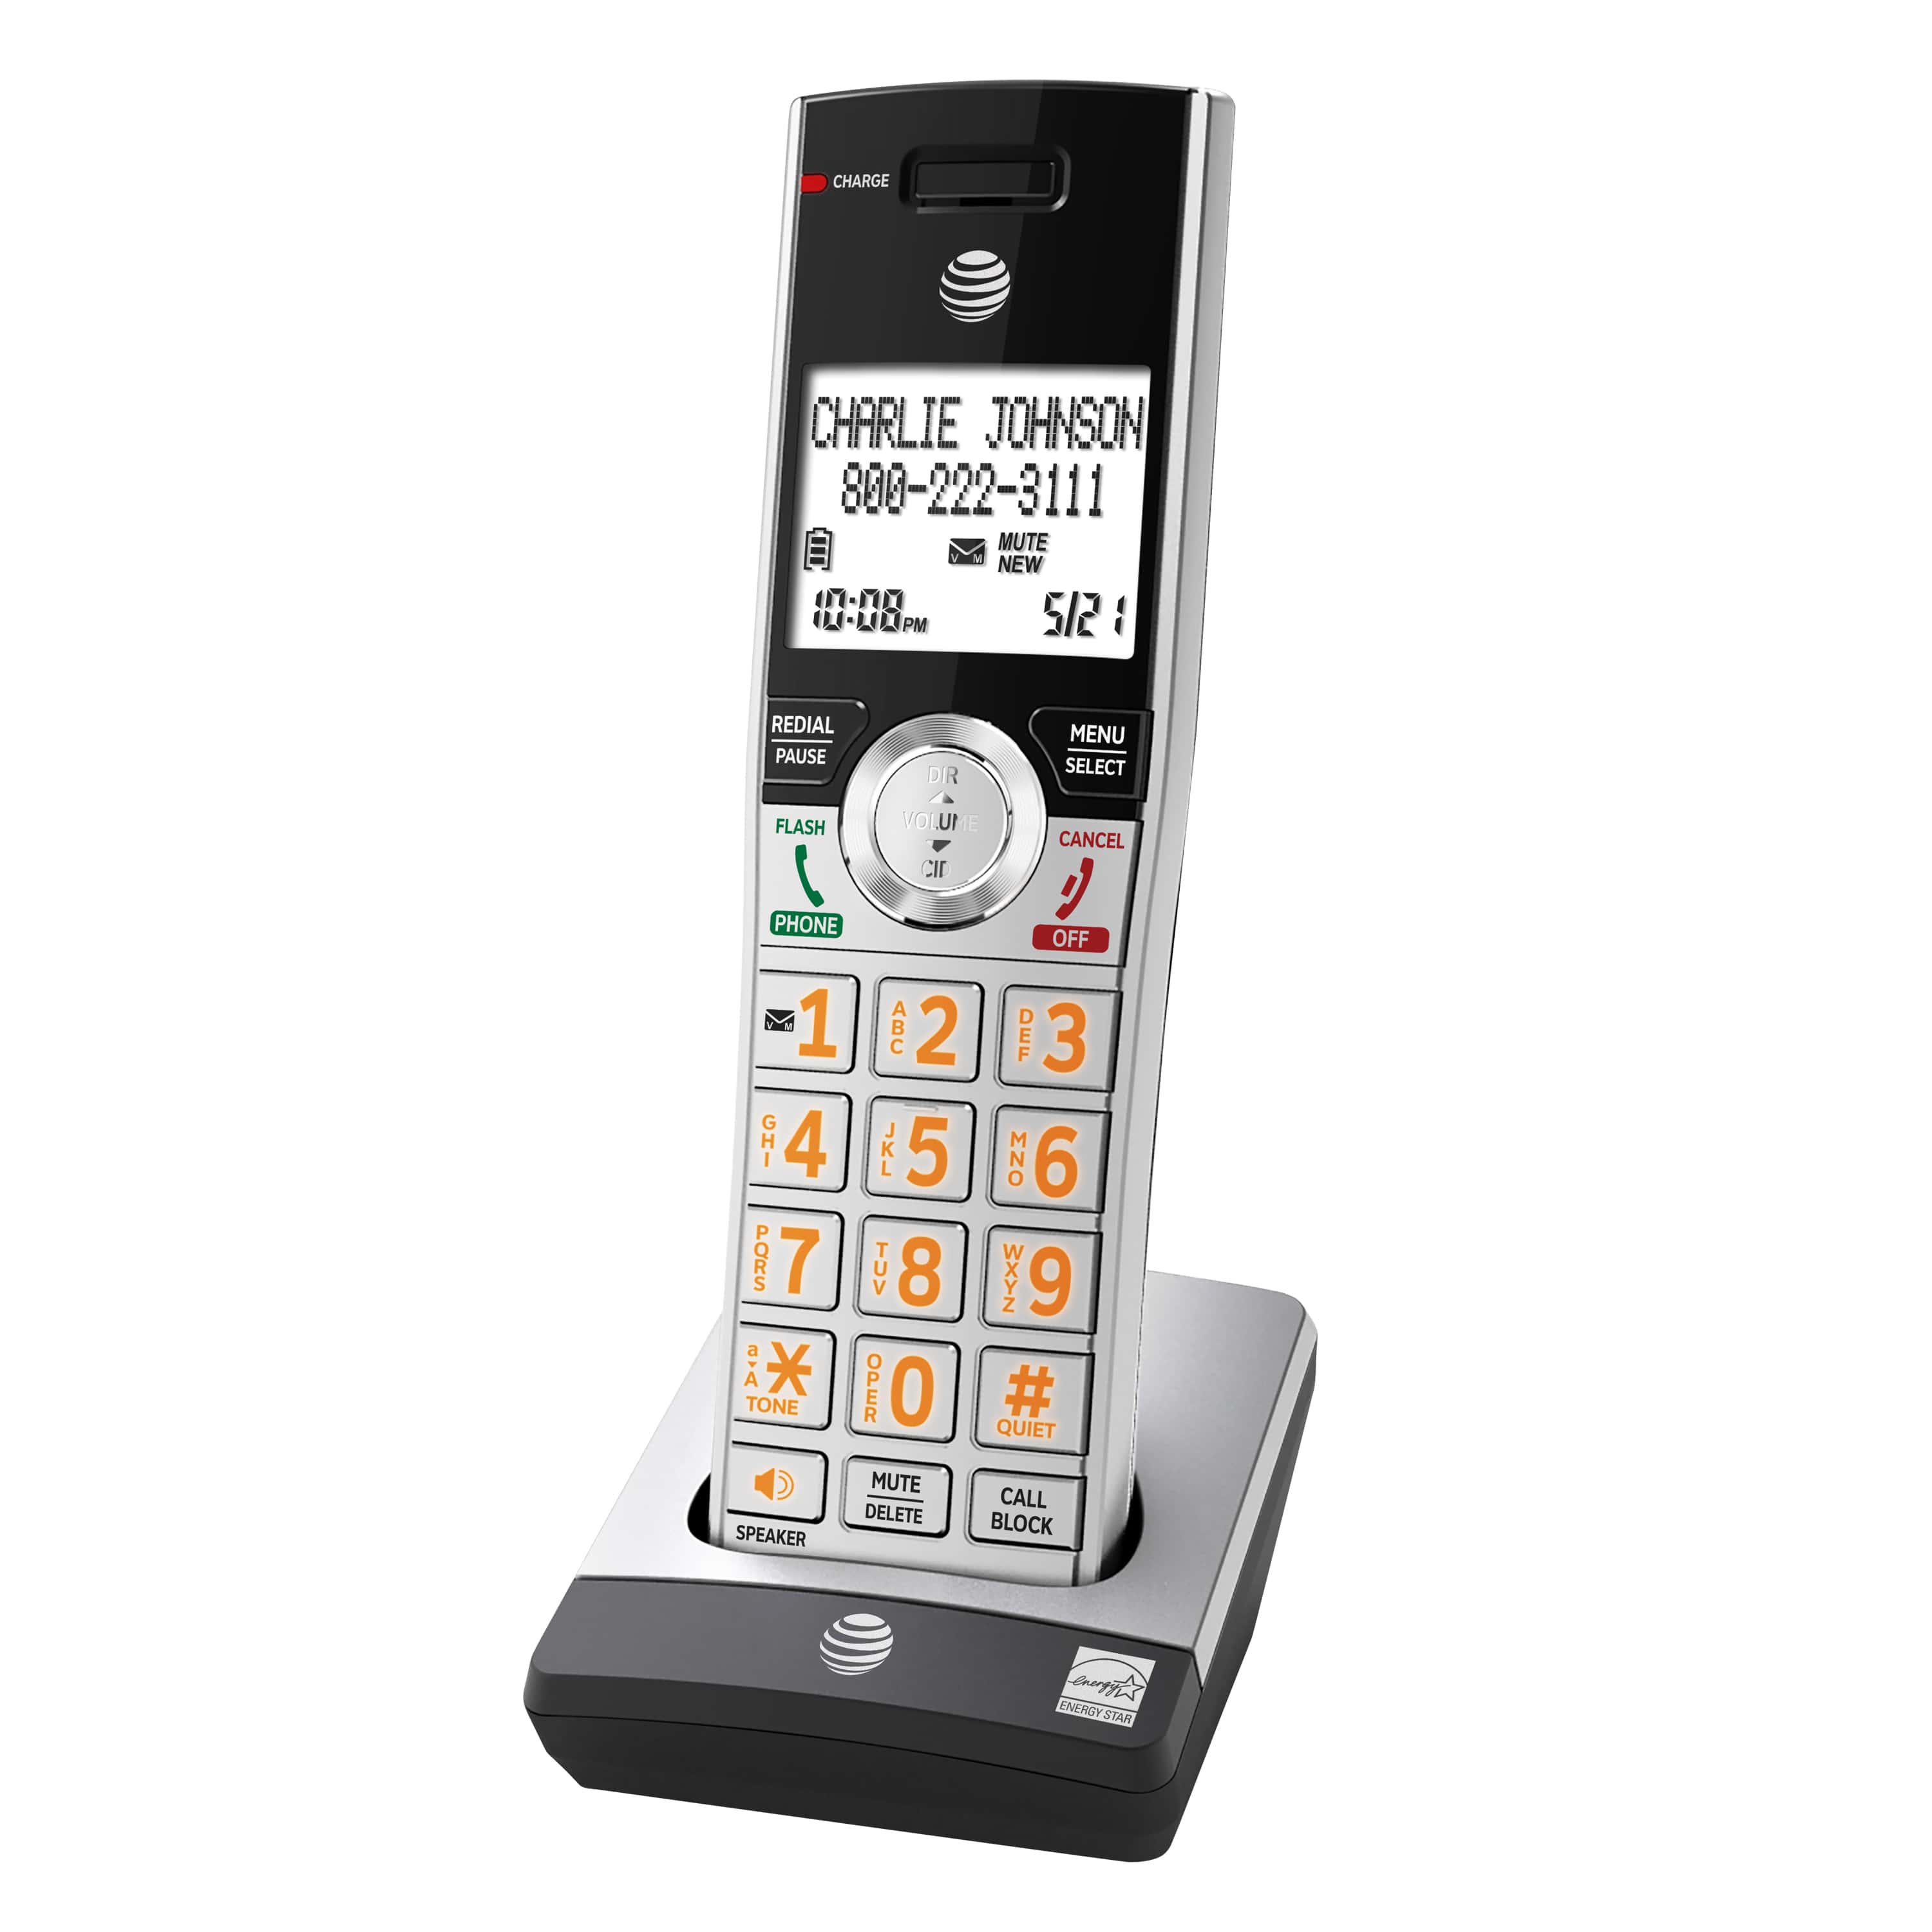 6 handset phone system with smart call blocker - view 15